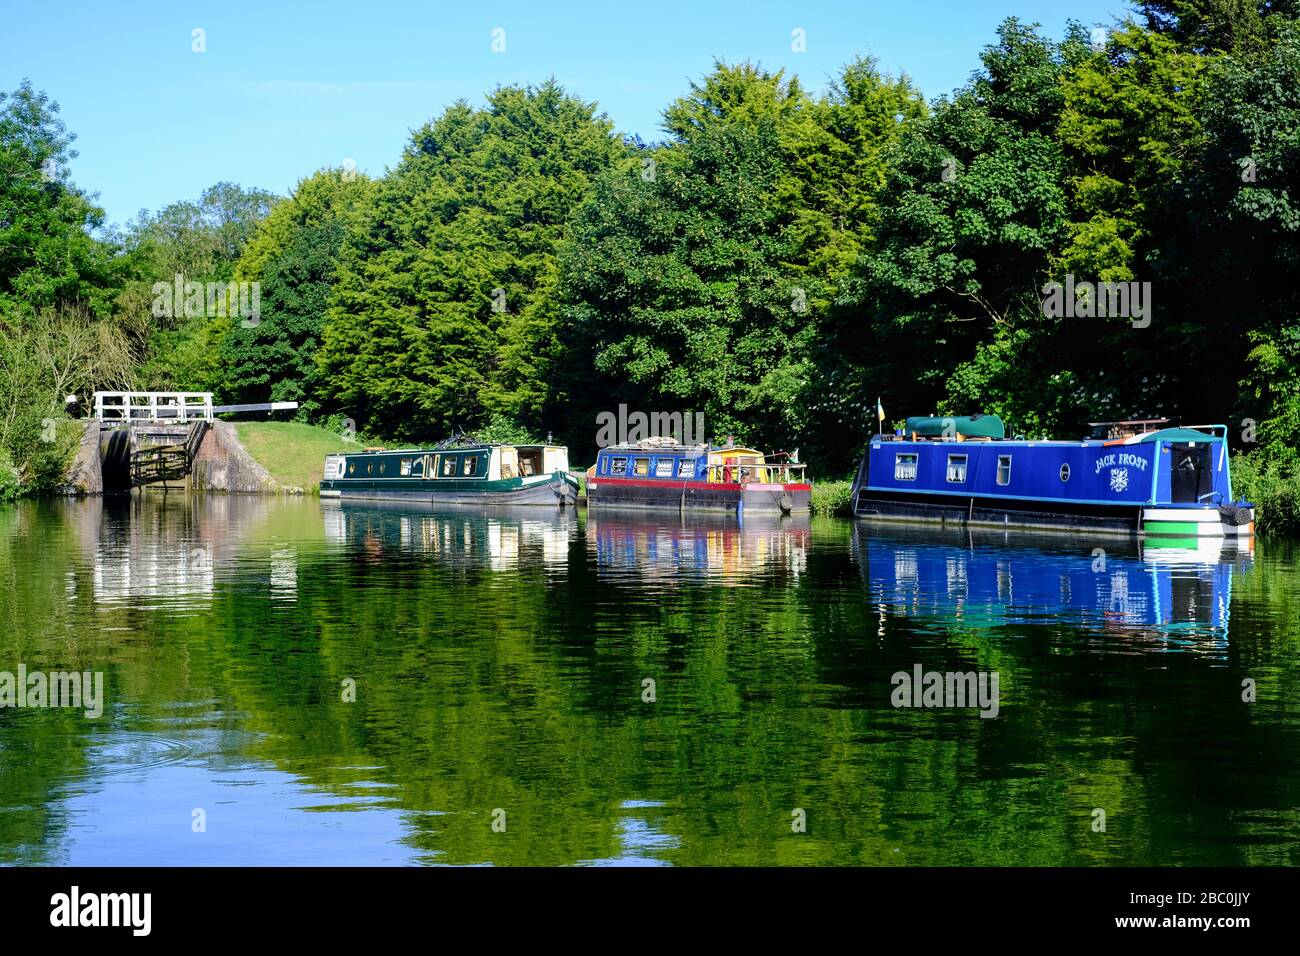 Narrowboats waiting at a lock on the Kennet and Avon Canal near Devizes, Wiltshire, UK Stock Photo